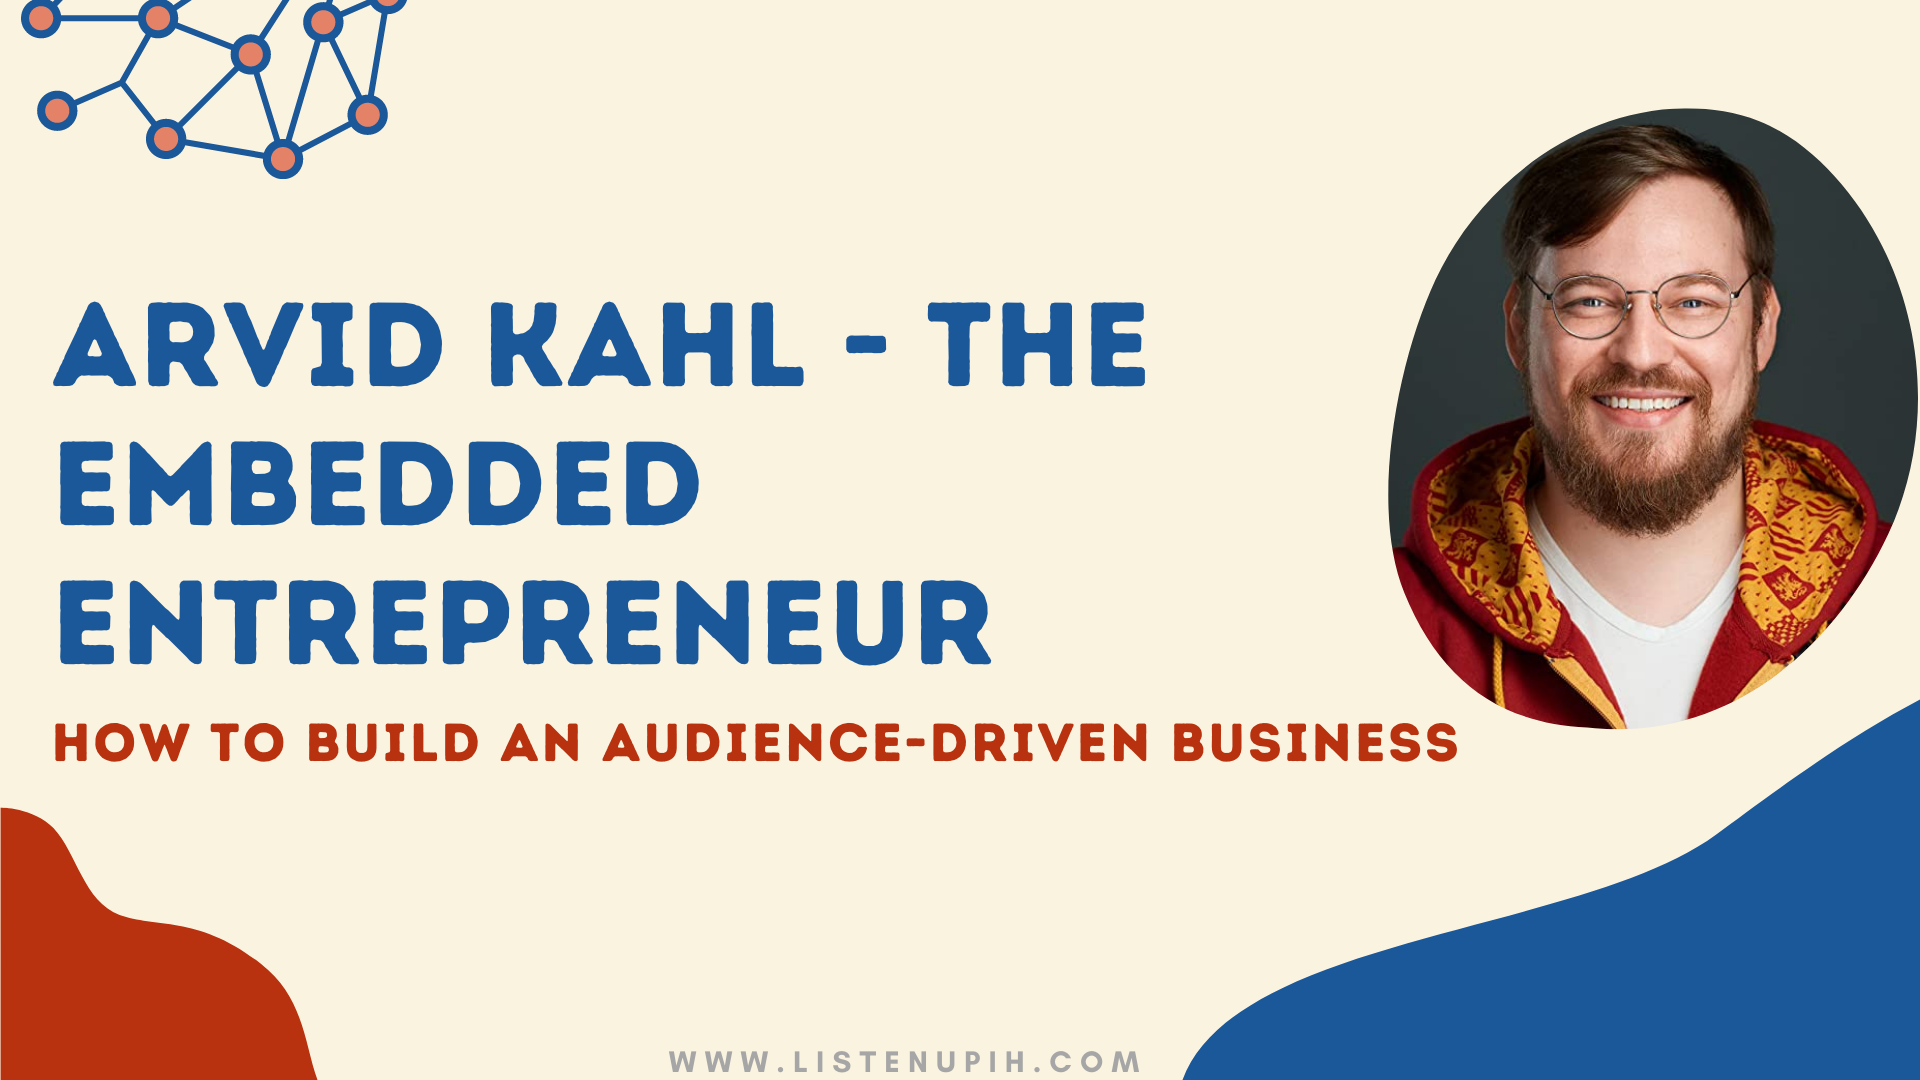 🧑‍🏫 Learn from Arvid Kahl - The Embedded Entrepreneur